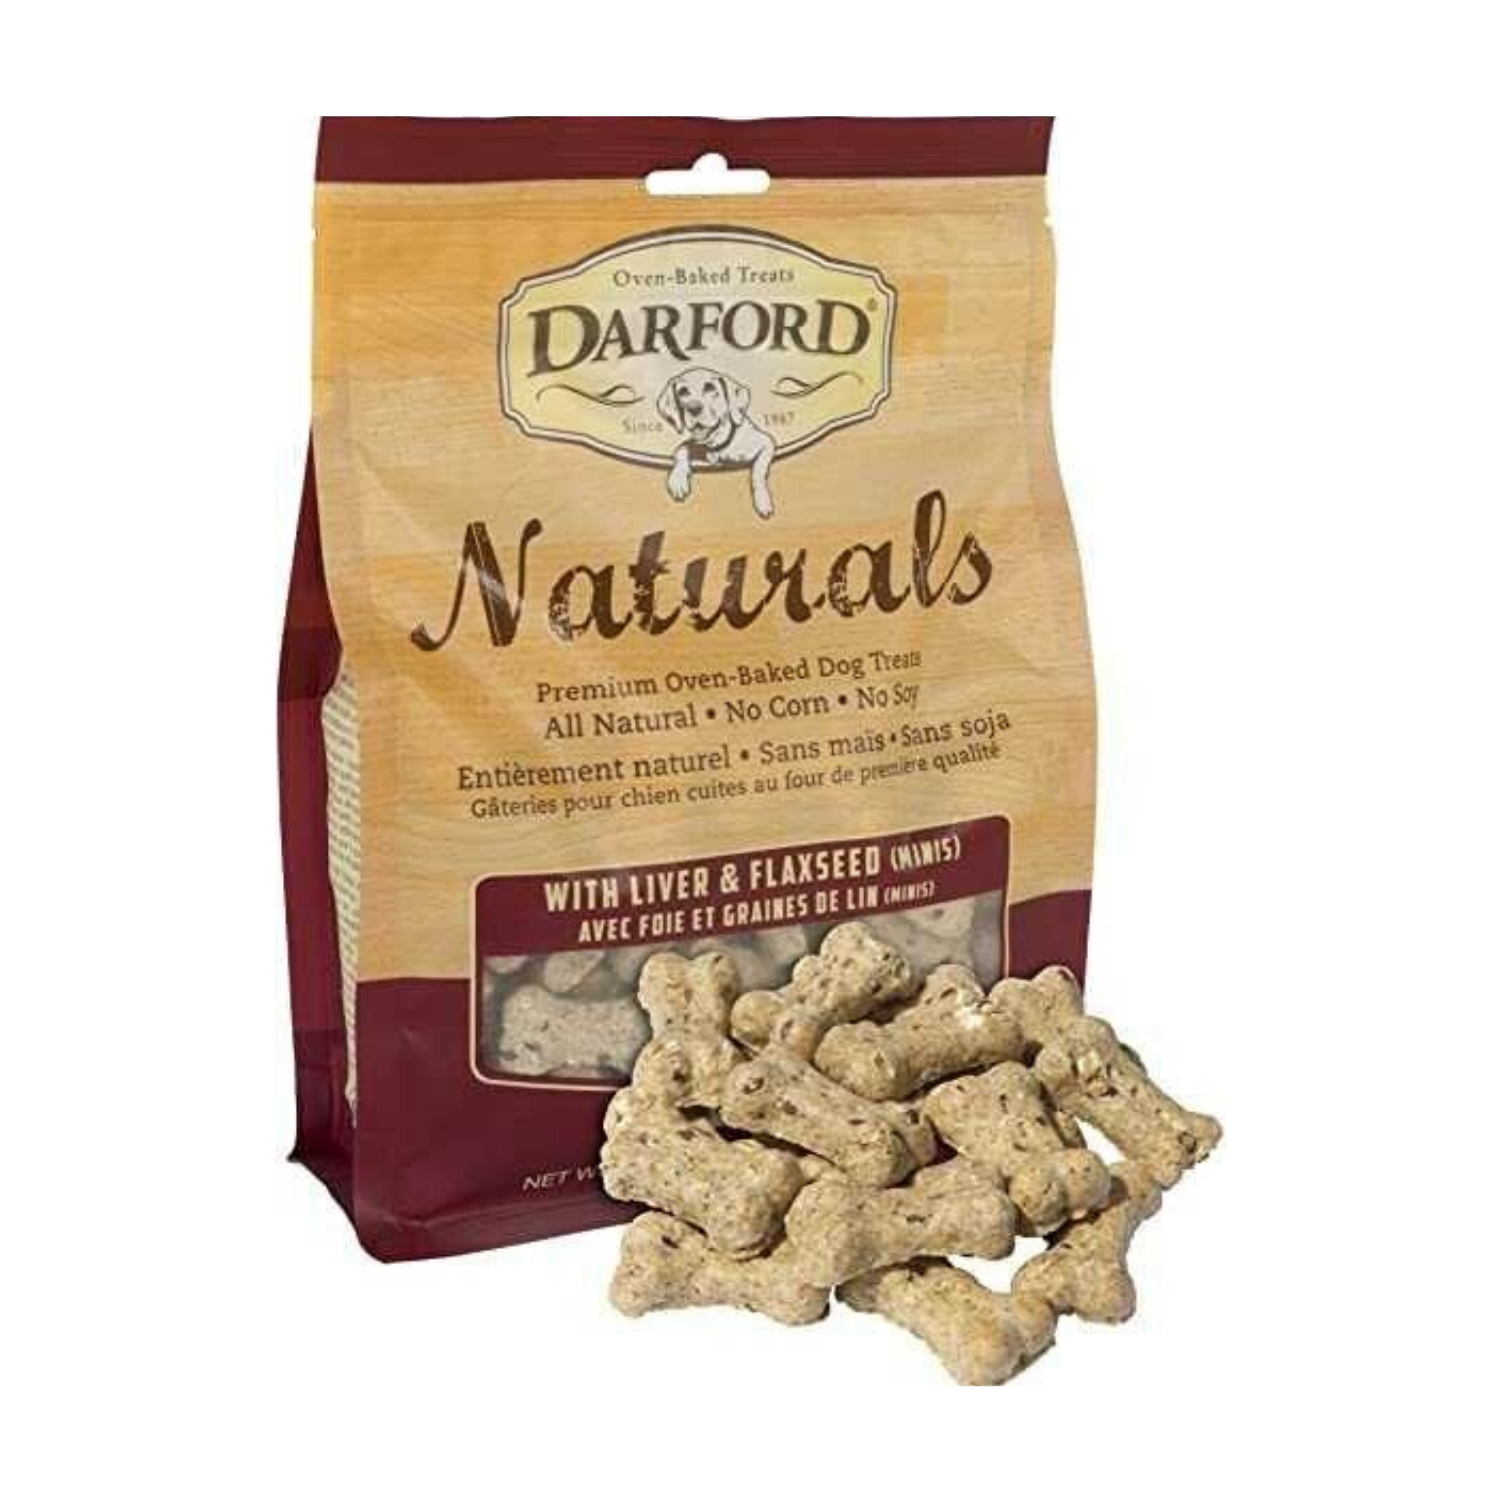 [DISCONTINUED] Darford Naturals (Liver & Flaxseed Minis) for Dogs - 170g / 400g